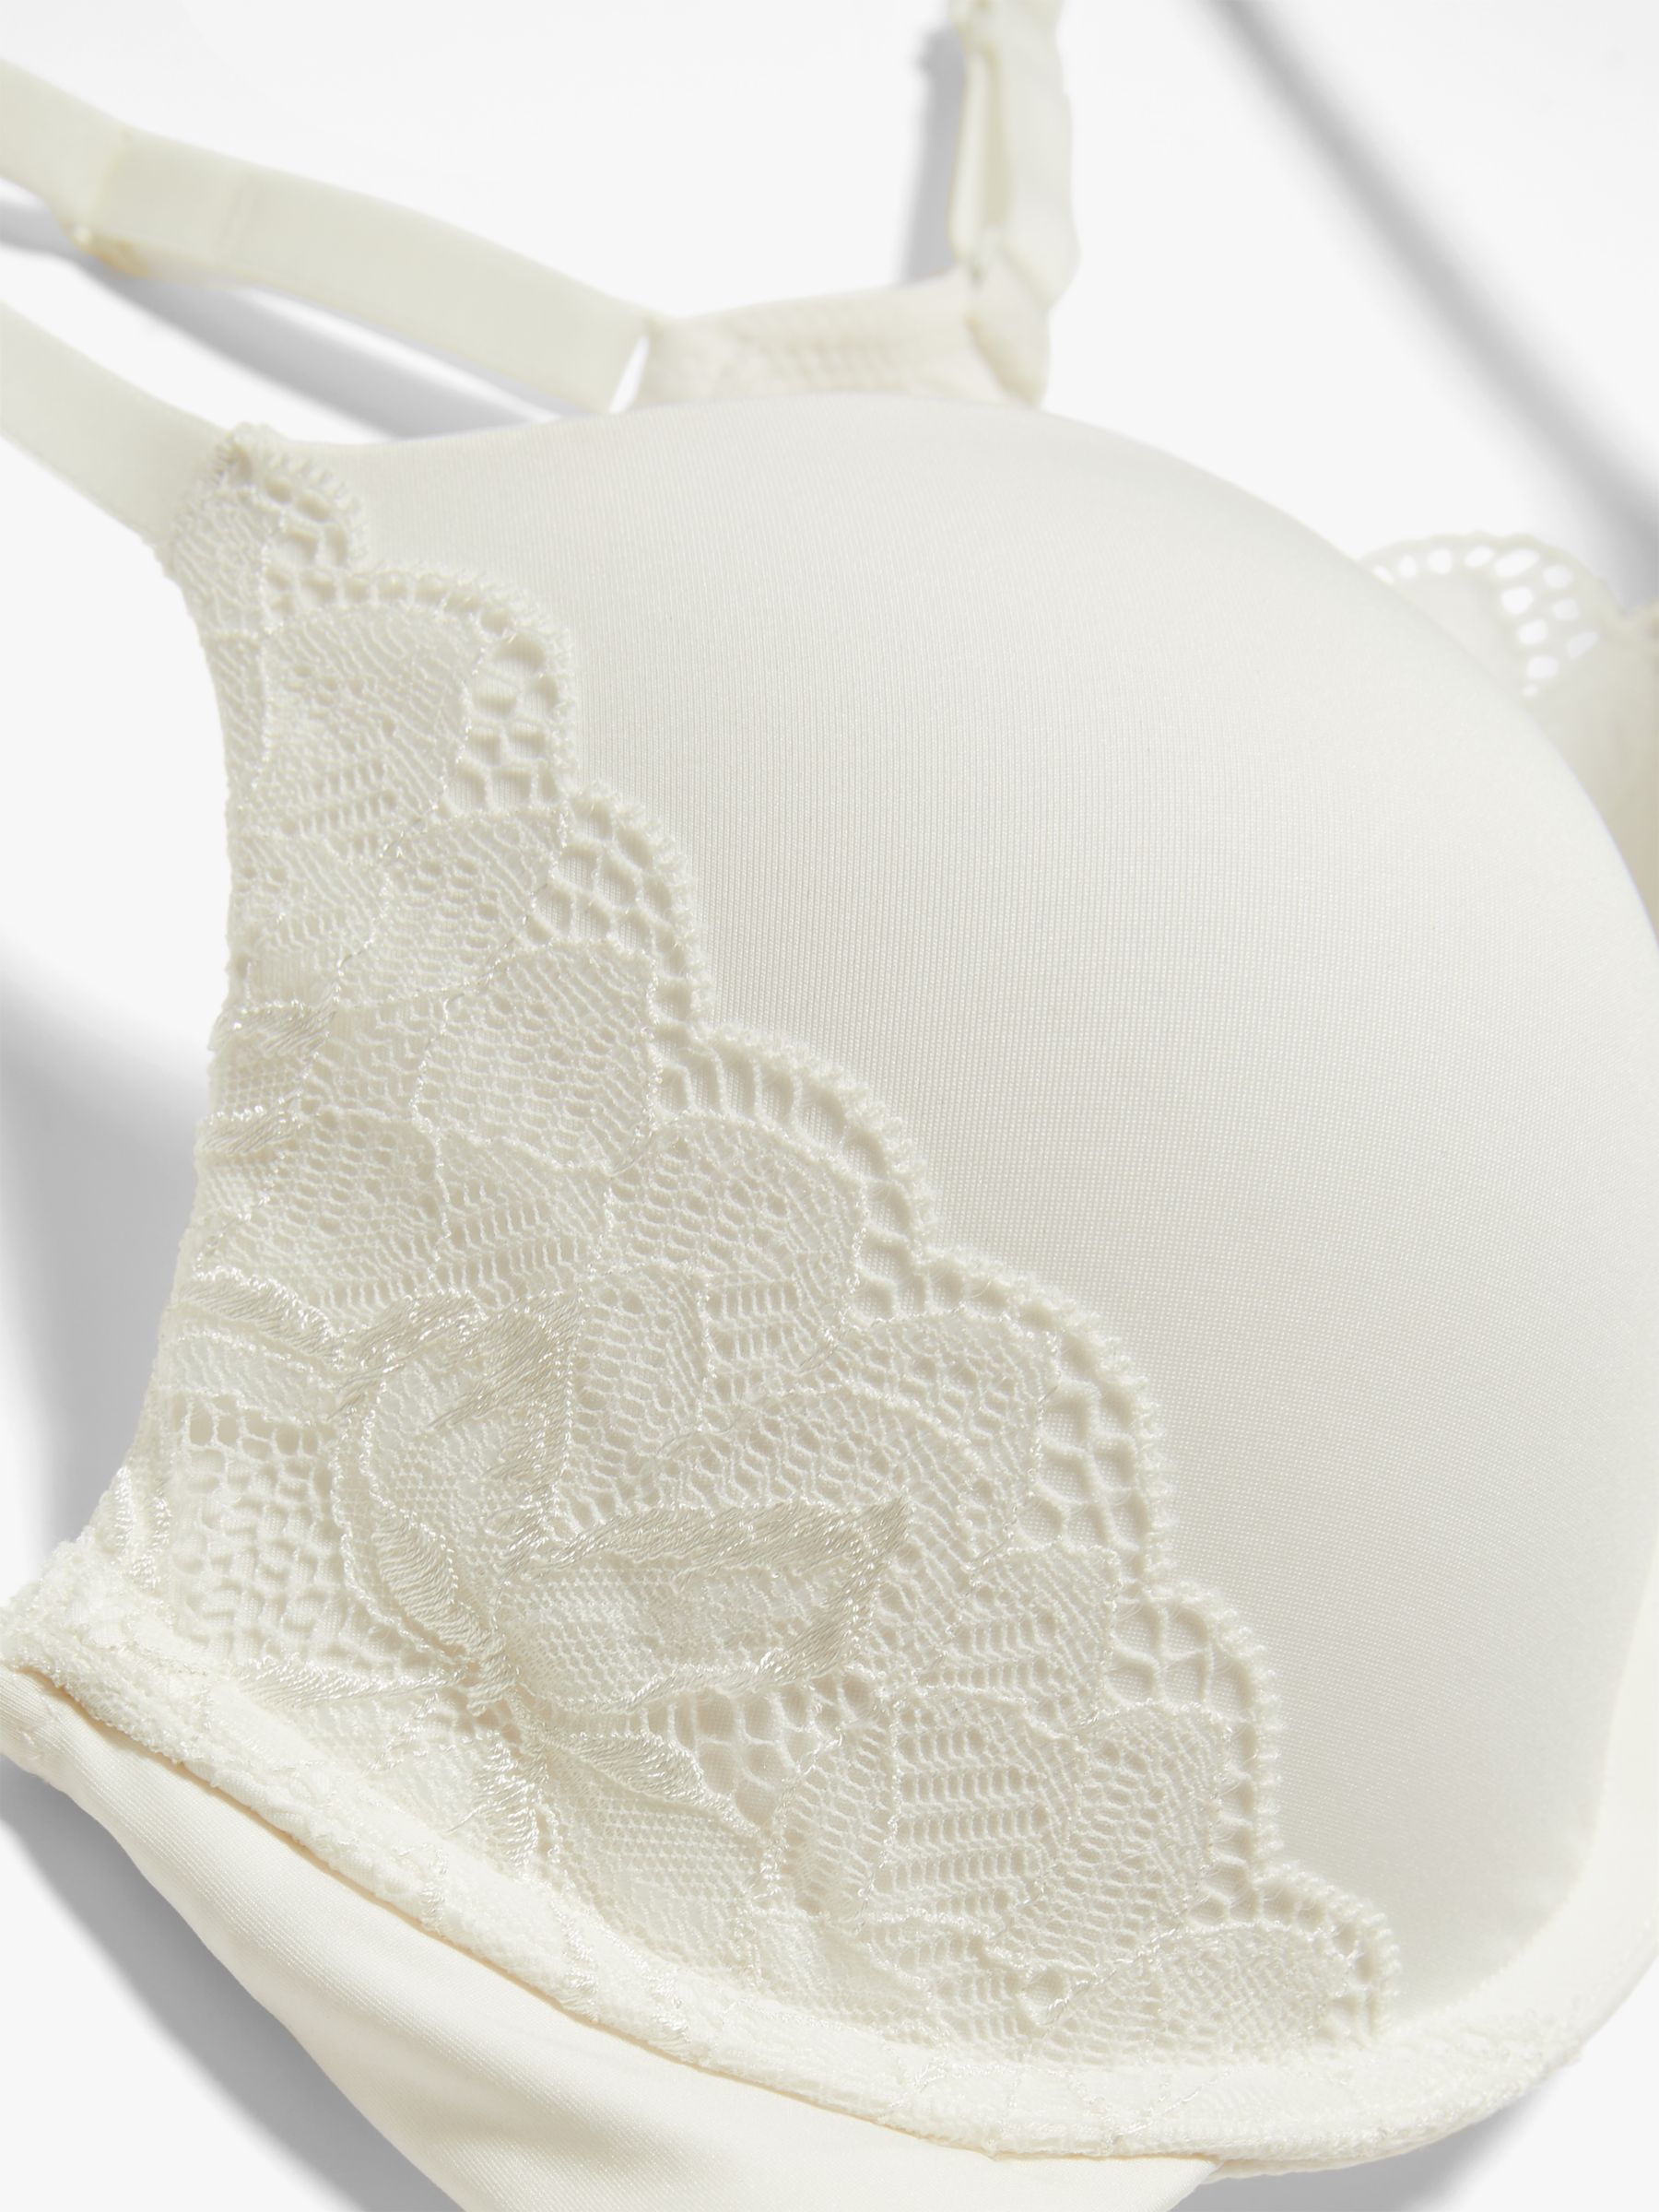 AND/OR Cassidy Satin Bra, Ivory at John Lewis & Partners